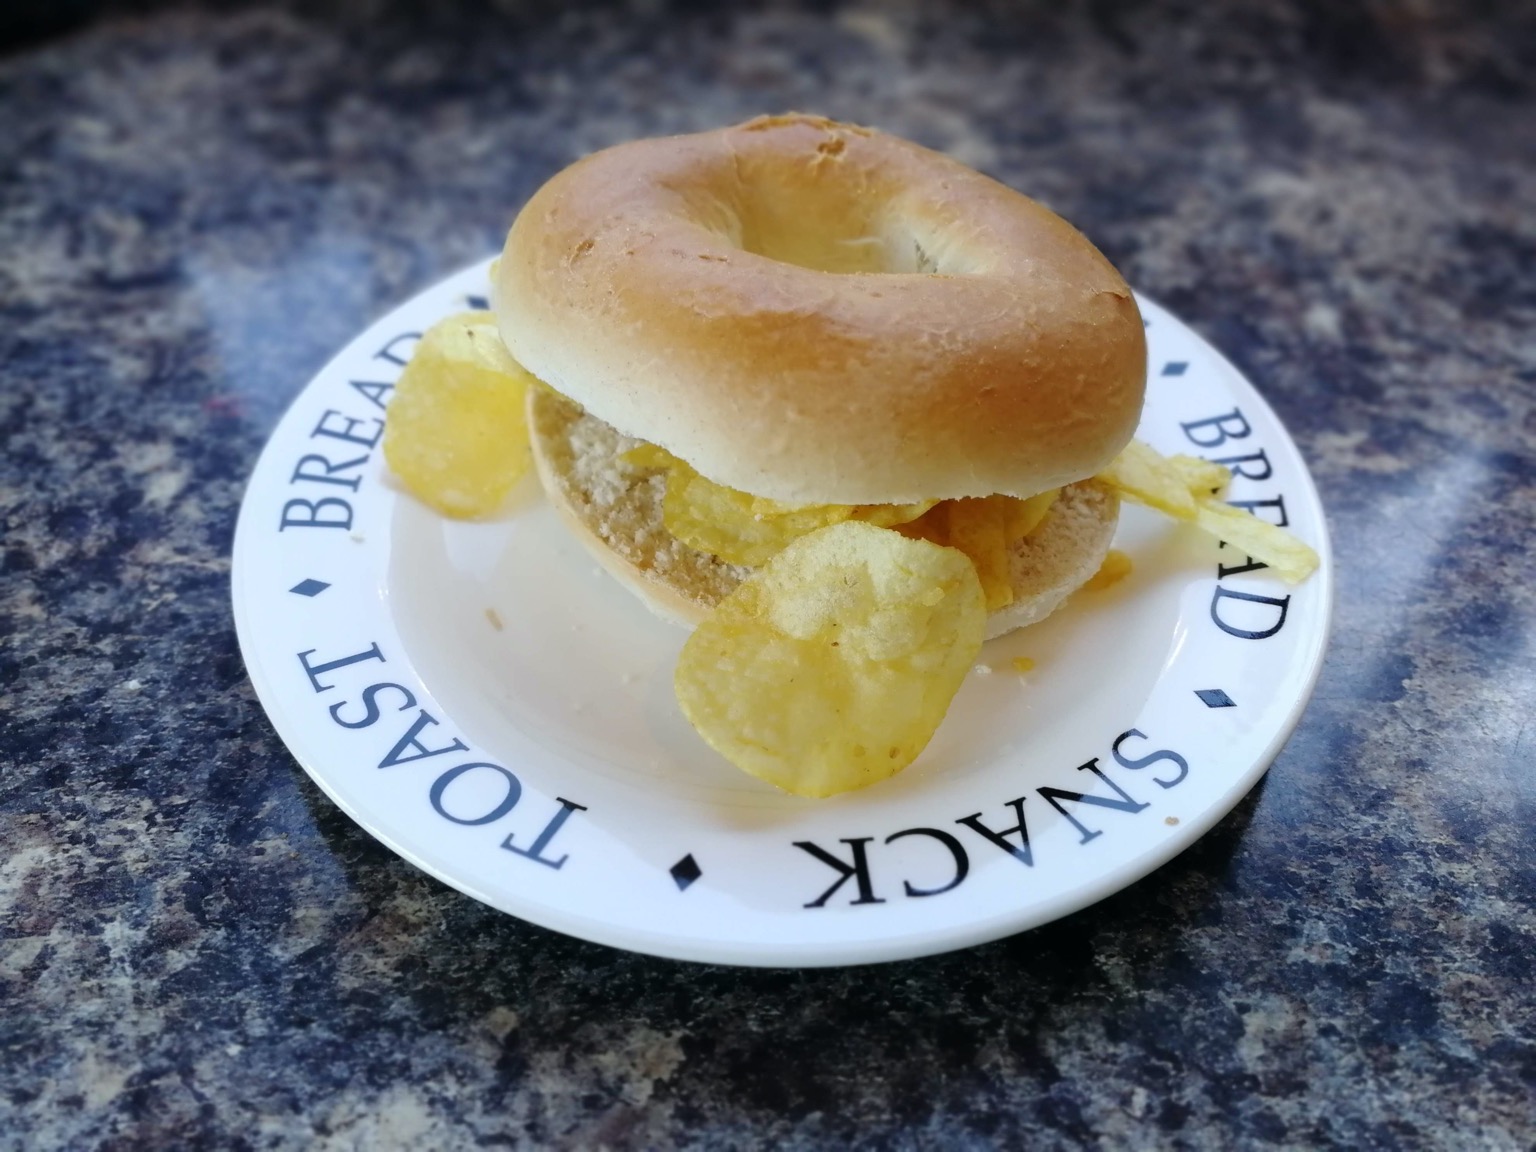 Crisp-overfilled bagel on a typographic plate